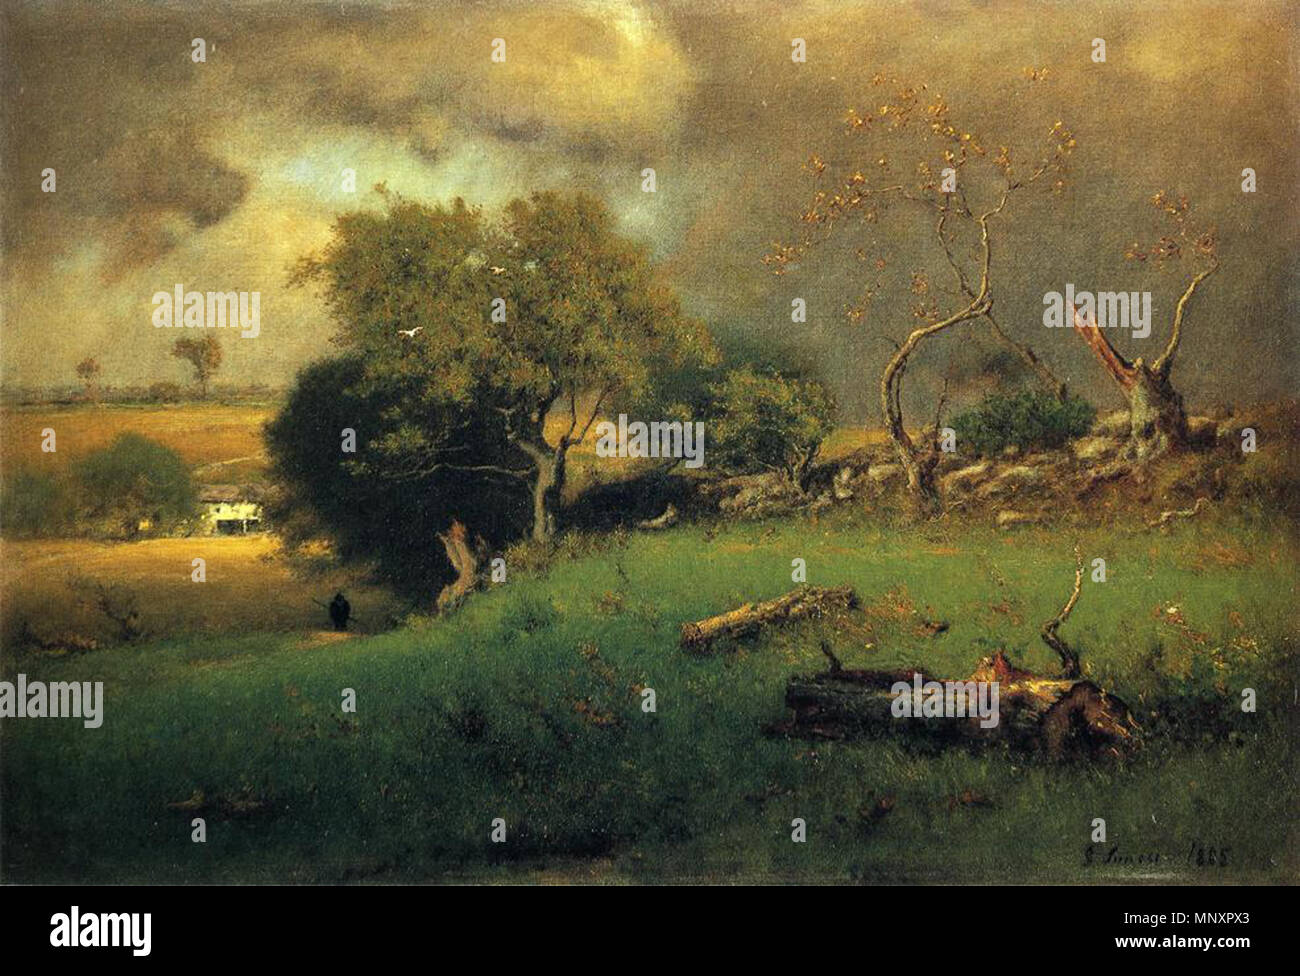 .  English: 'The Storm,' oil on canvas, by the American painter George Inness. Courtesy of Reynolda House Museum of American Art, Winston-Salem, North Carolina, reynoldahouse.org . 1885.    George Inness  (1825–1894)     Description American painter  Date of birth/death 1 May 1825 3 August 1894  Location of birth/death Newburgh (New York) Bridge of Allan (Scotland)  Work location New York, Medfield (Massachusetts), Eagleswood (New Jersey), Montclair (New Jersey), France  Authority control  : Q704868 VIAF: 35252496 ISNI: 0000 0000 8218 6021 ULAN: 500013380 LCCN: n79007221 NLA: 35222477 WorldCat Stock Photo